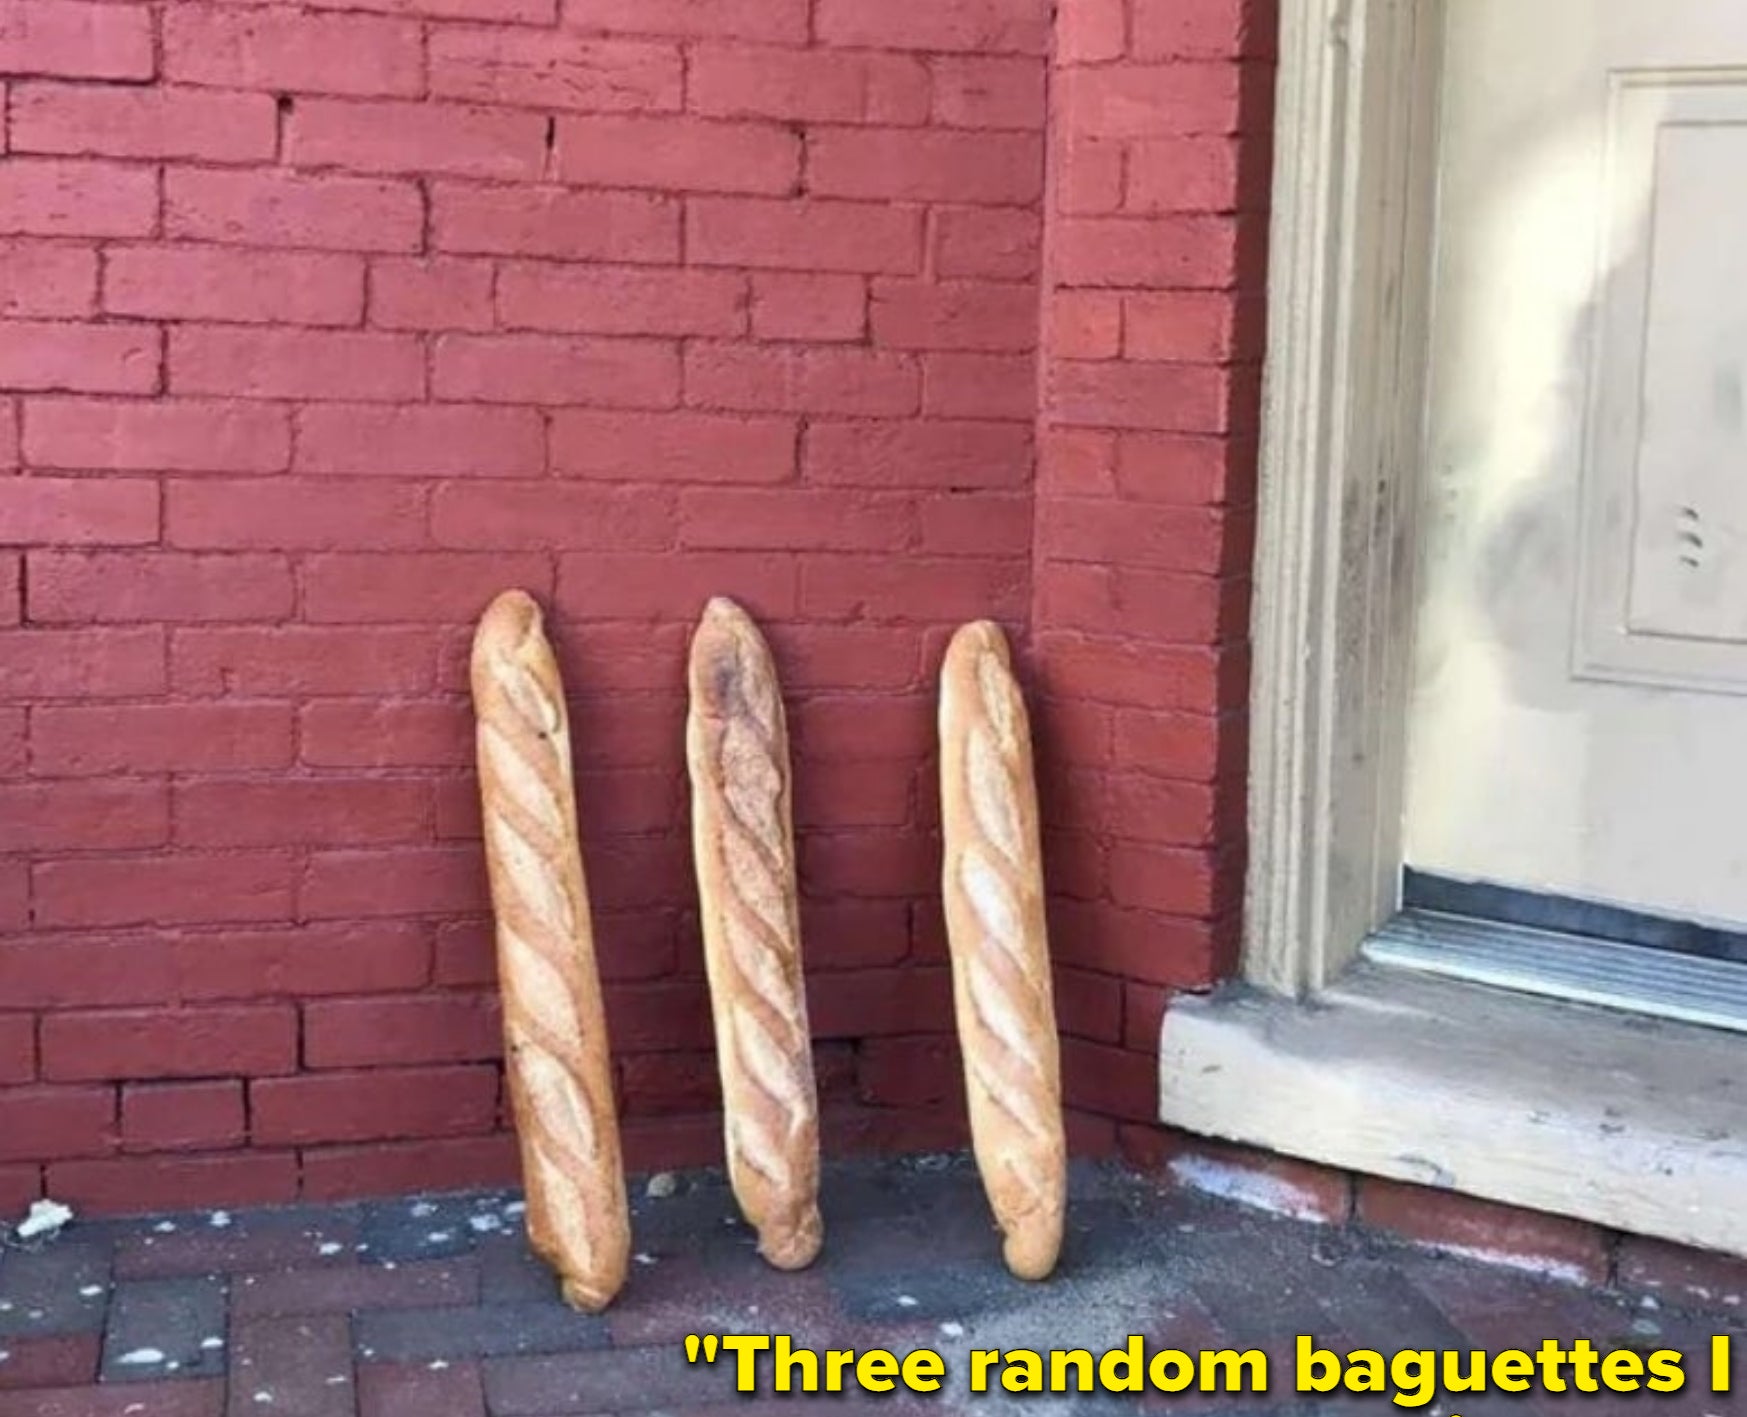 Three random baguettes are chilling outside, leaning against a brick wall